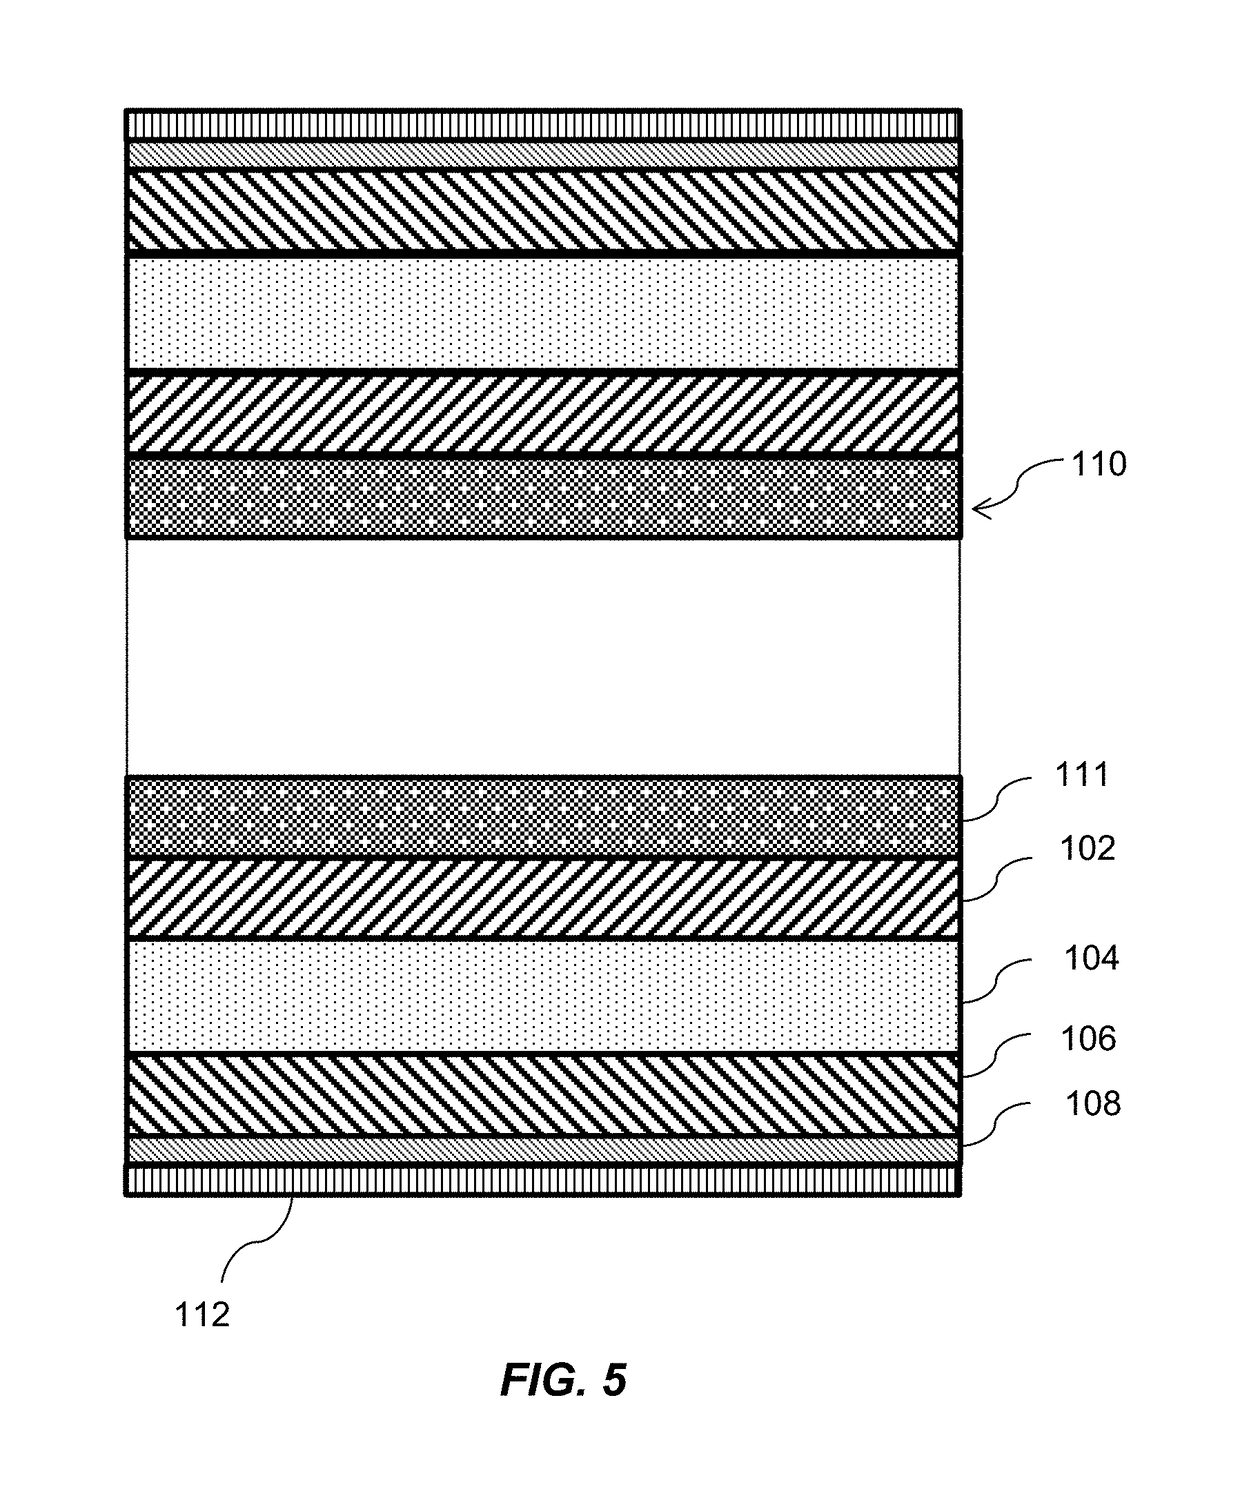 Multi-functional protective assemblies, systems including protective assemblies, and related methods